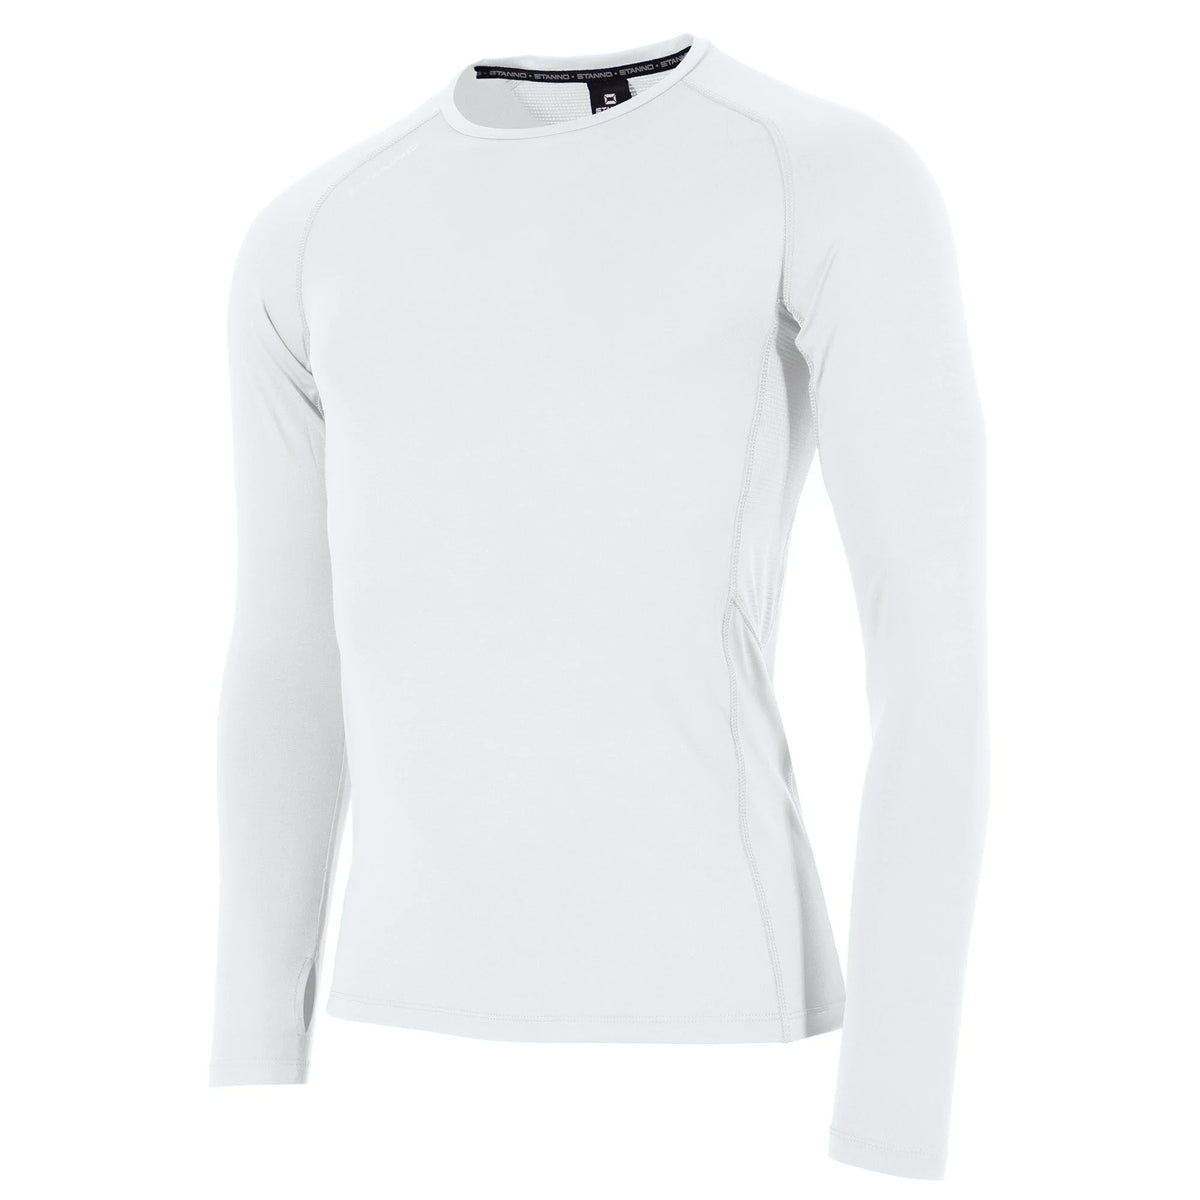 Core Long Sleeve Baselayer Shirt in Adult